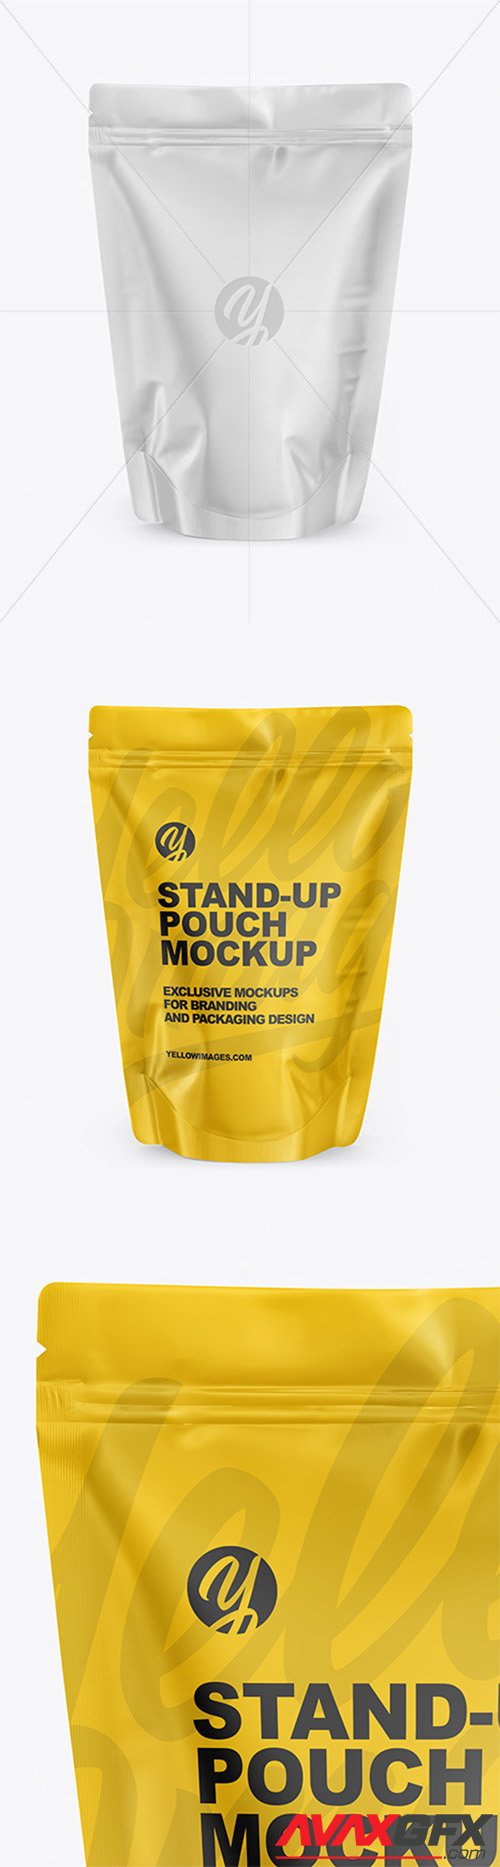 Download Glossy Vacuum Pouch Mockup 56085 Avaxgfx All Downloads That You Need In One Place Graphic From Nitroflare Rapidgator PSD Mockup Templates